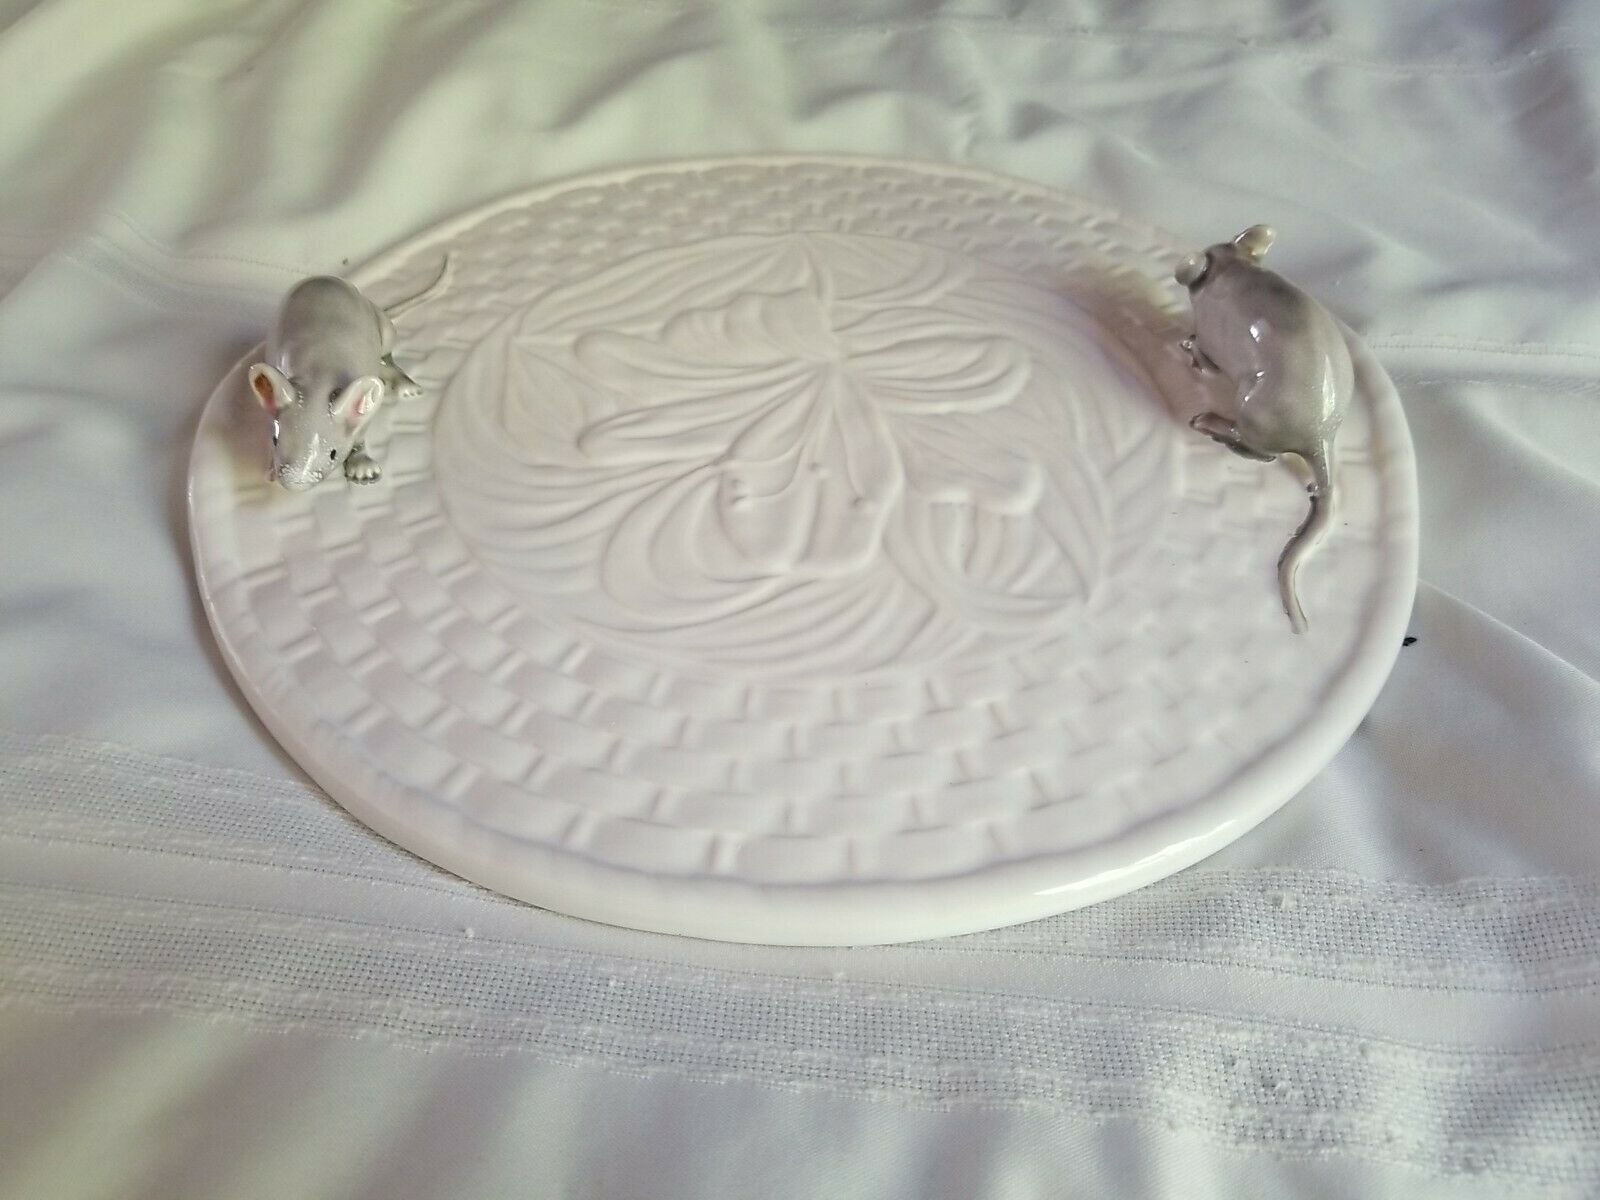 Large Bordallo Pinheiro Mouse Cheese Hordeurve Plate With 2 Mice - Portugal